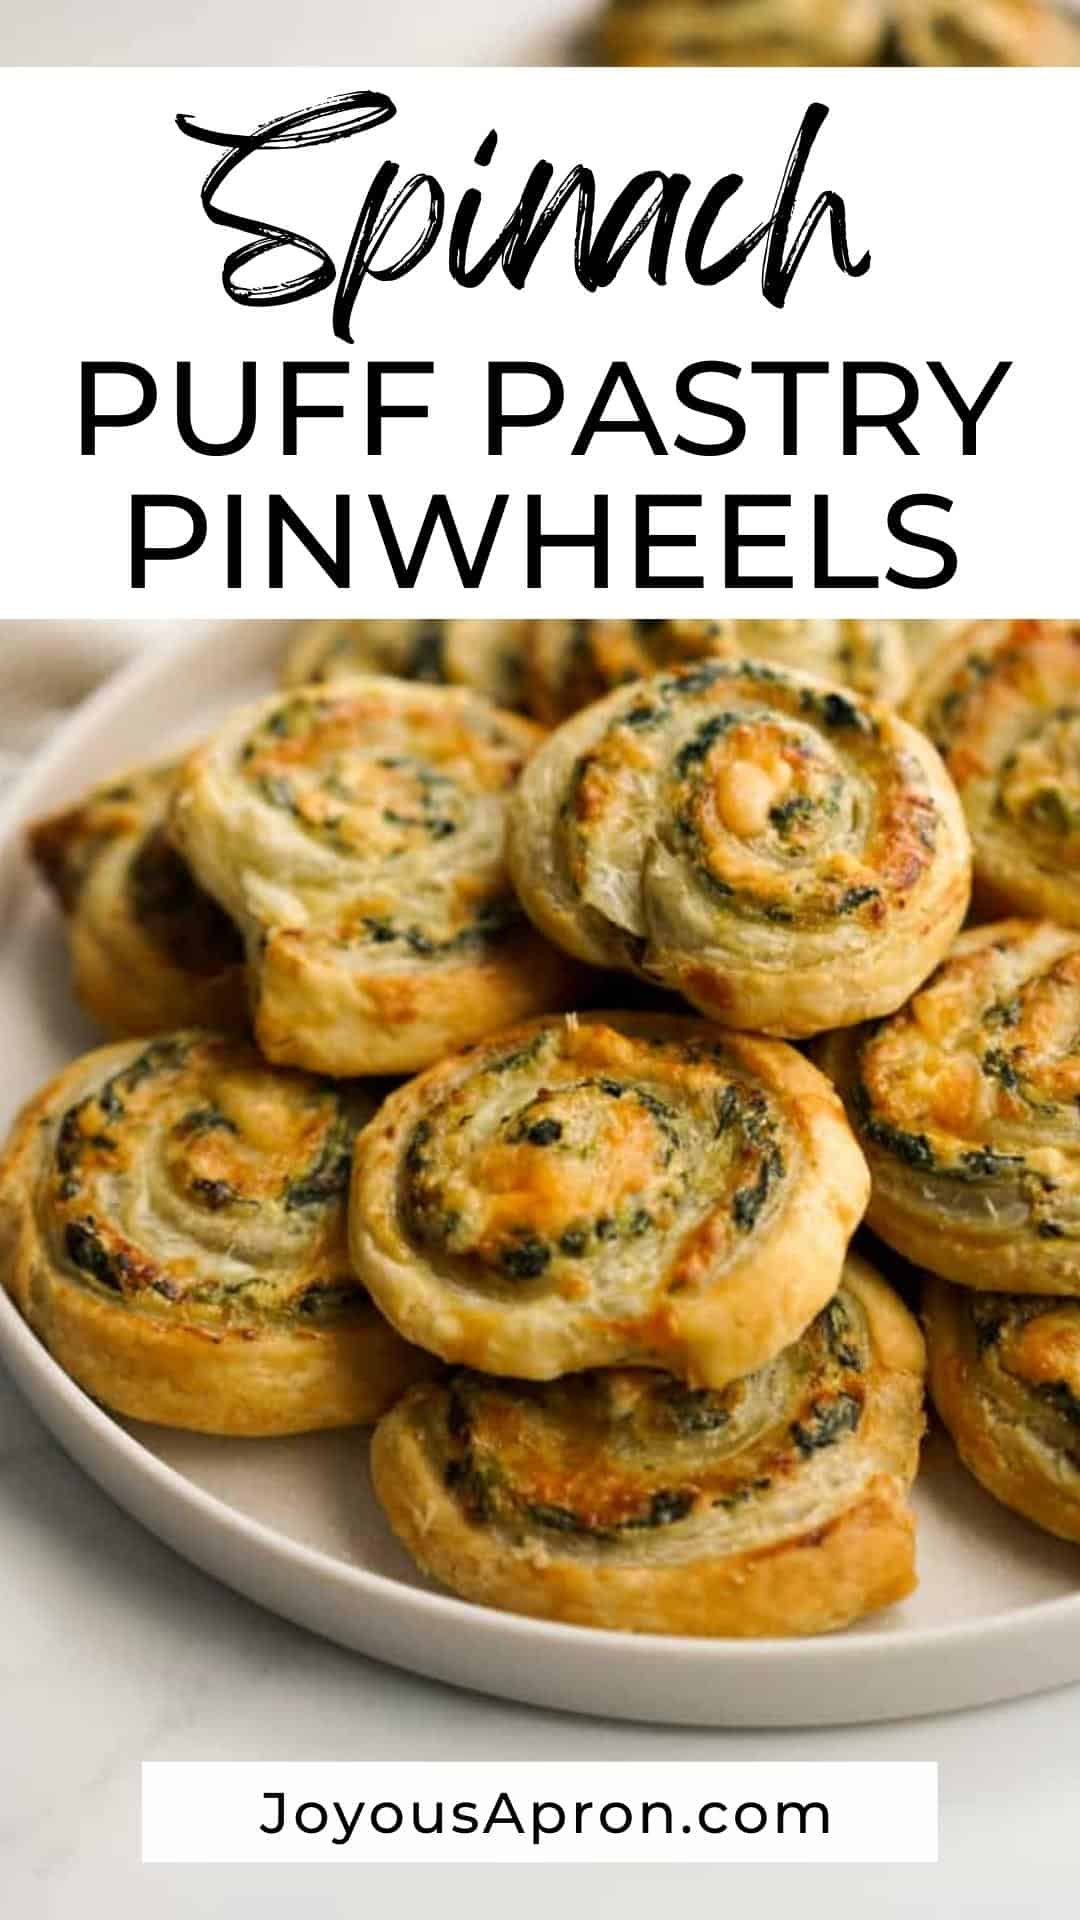 Spinach Pinwheels - easy party food, appetizer and finger food for game day and the holidays. Oven baked buttery puff pastry appetizers rolled with a cheesy cream cheese spinach mixture with caramelized onions. via @joyousapron